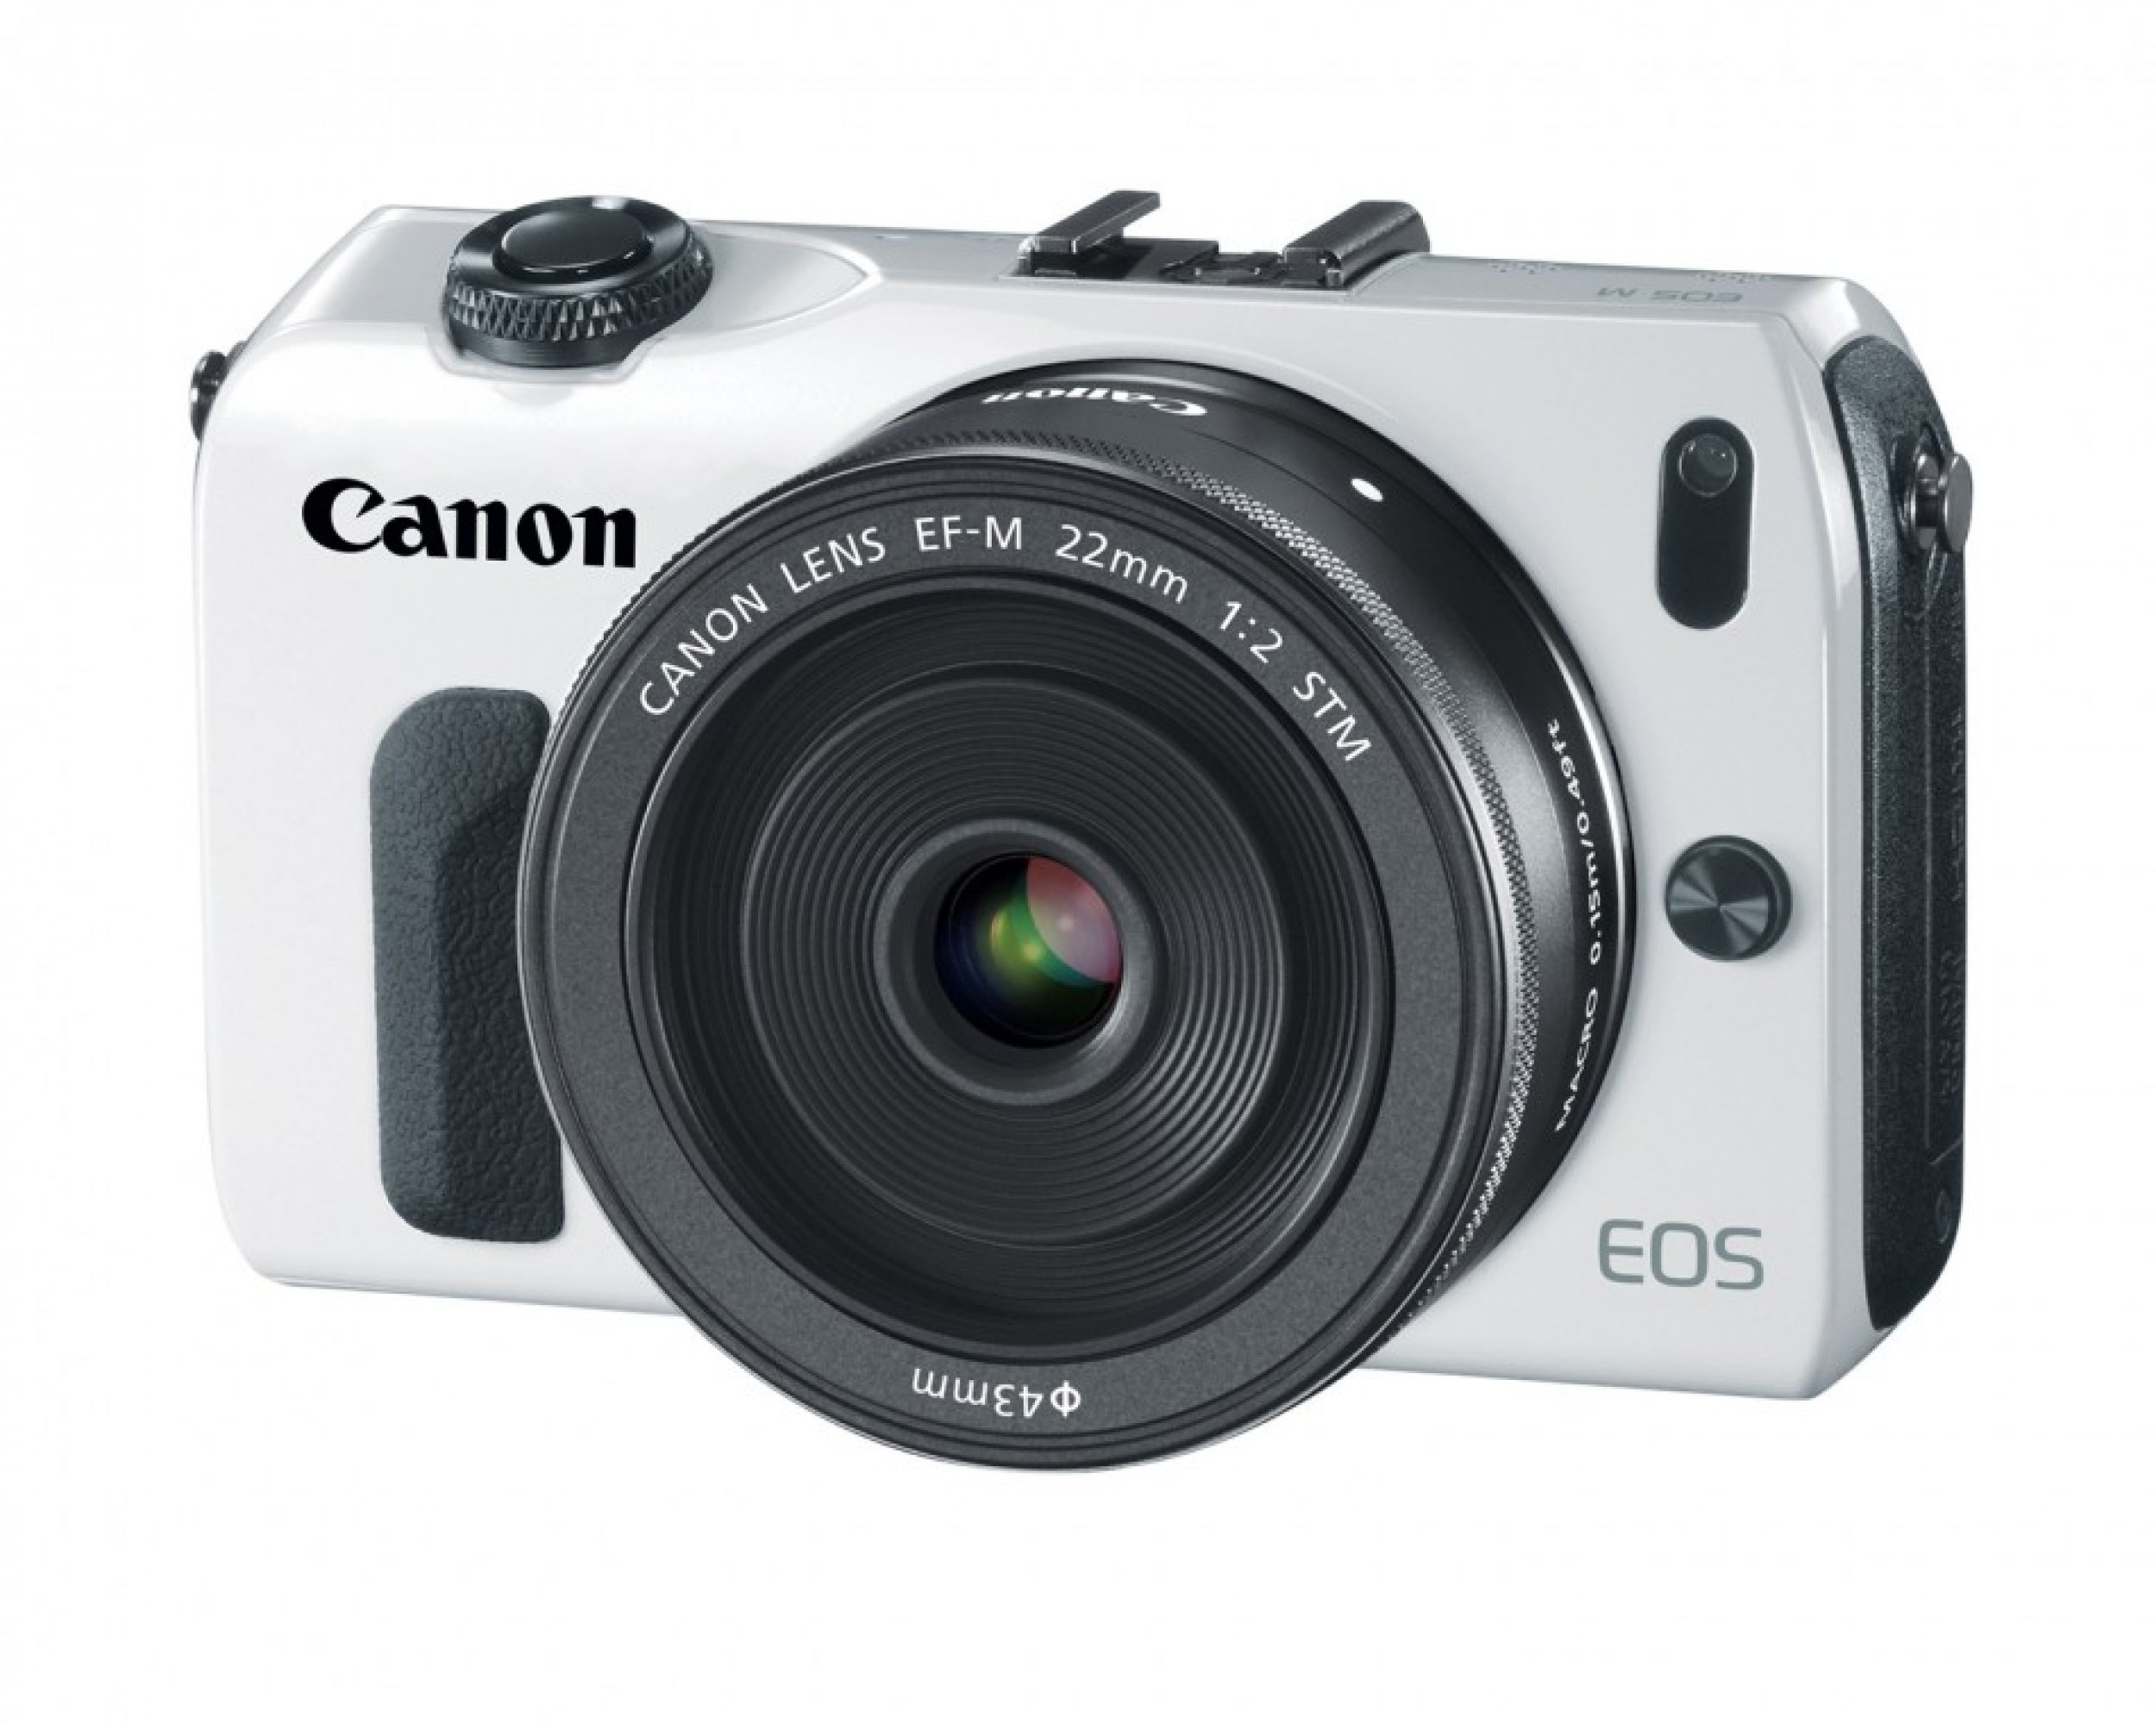 Canon Announces 18 Megapixel EOS M Mirrorless Camera Releasing In October At 799.99